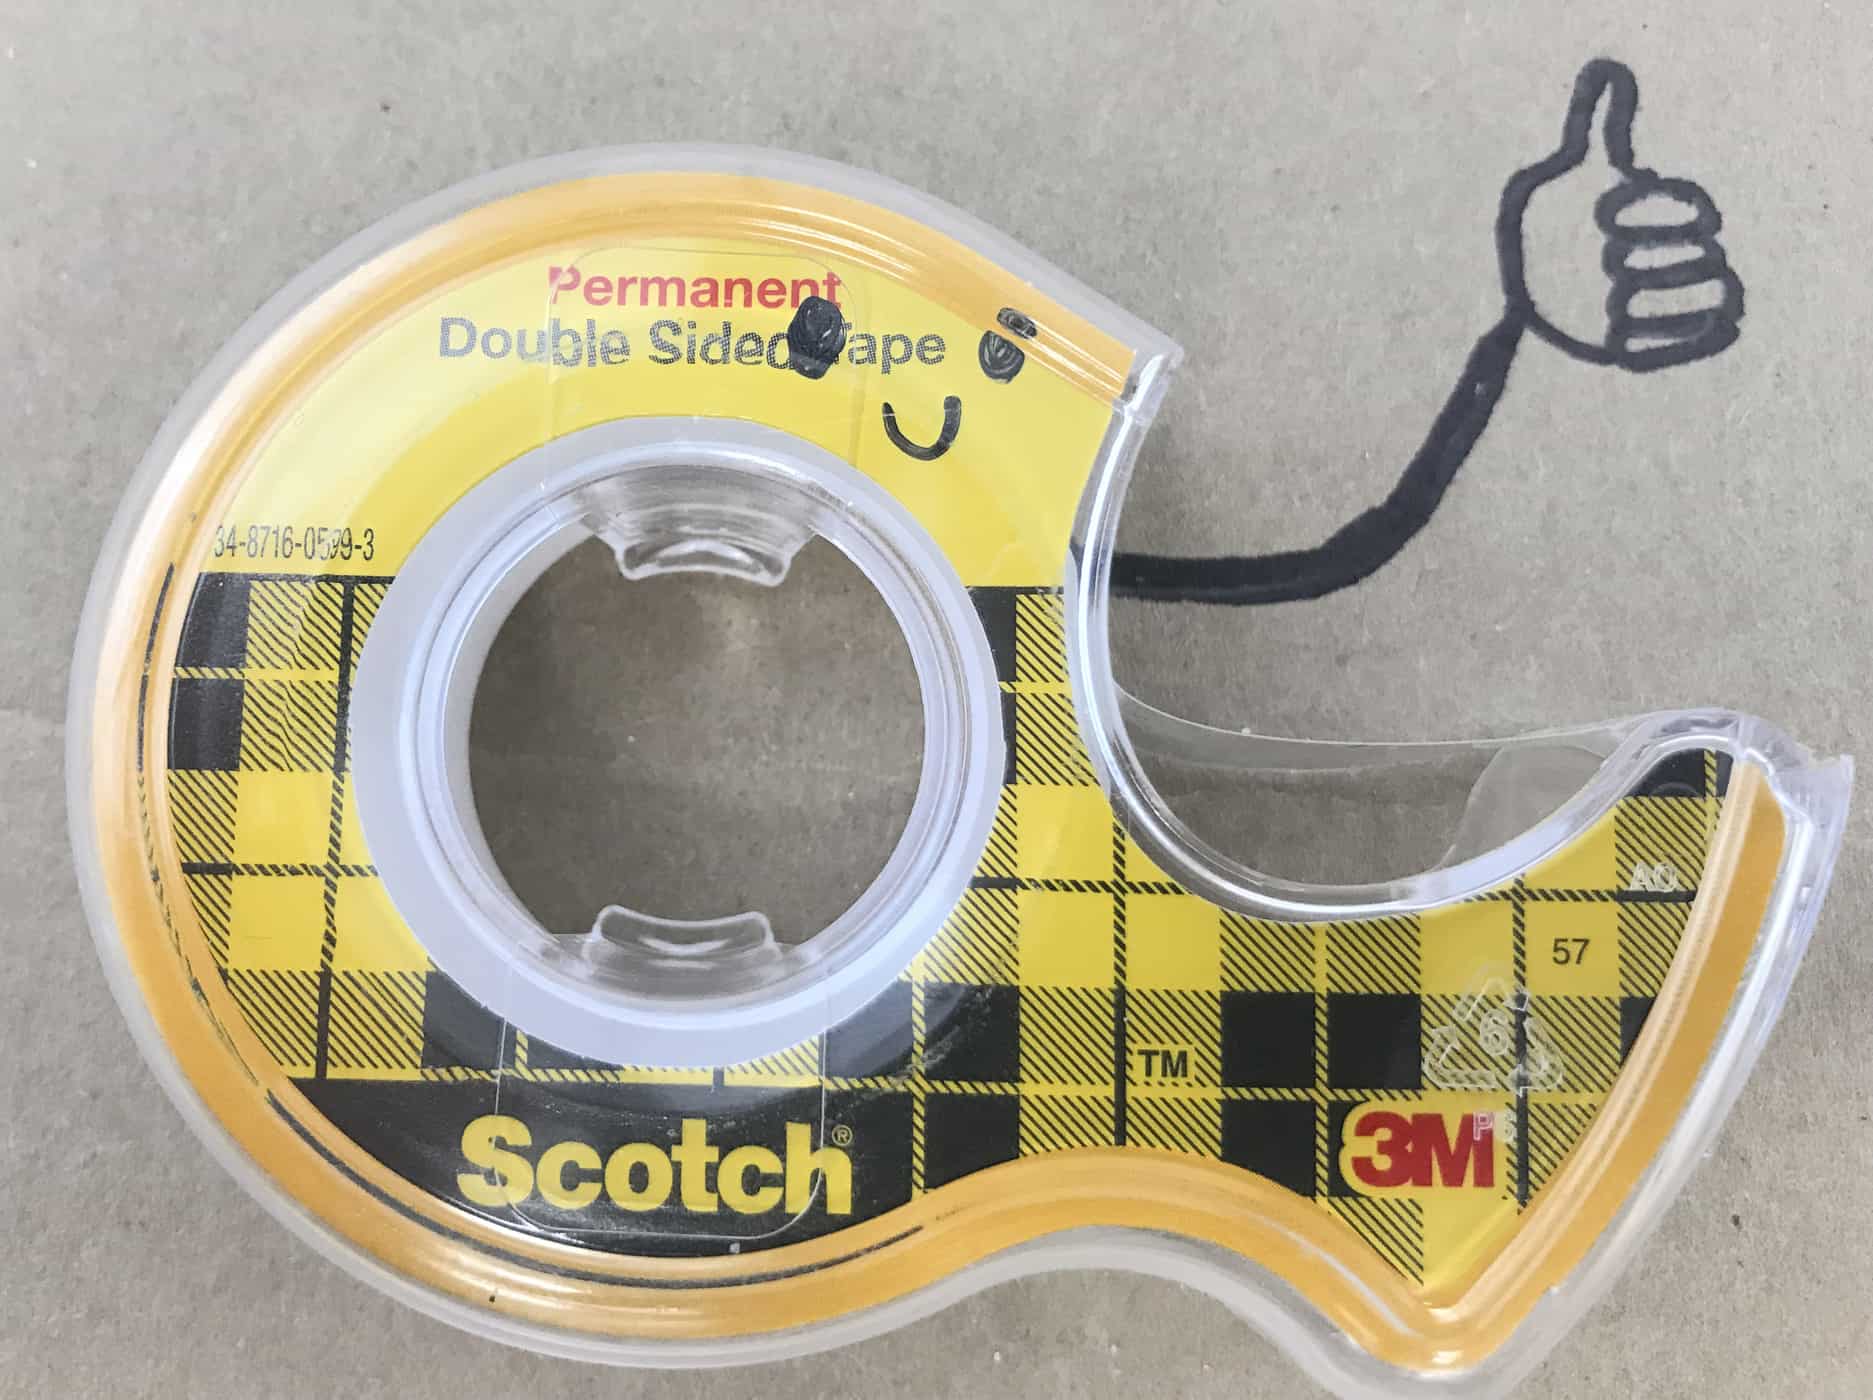 double sticky tape with silly face, holding a thumbs up